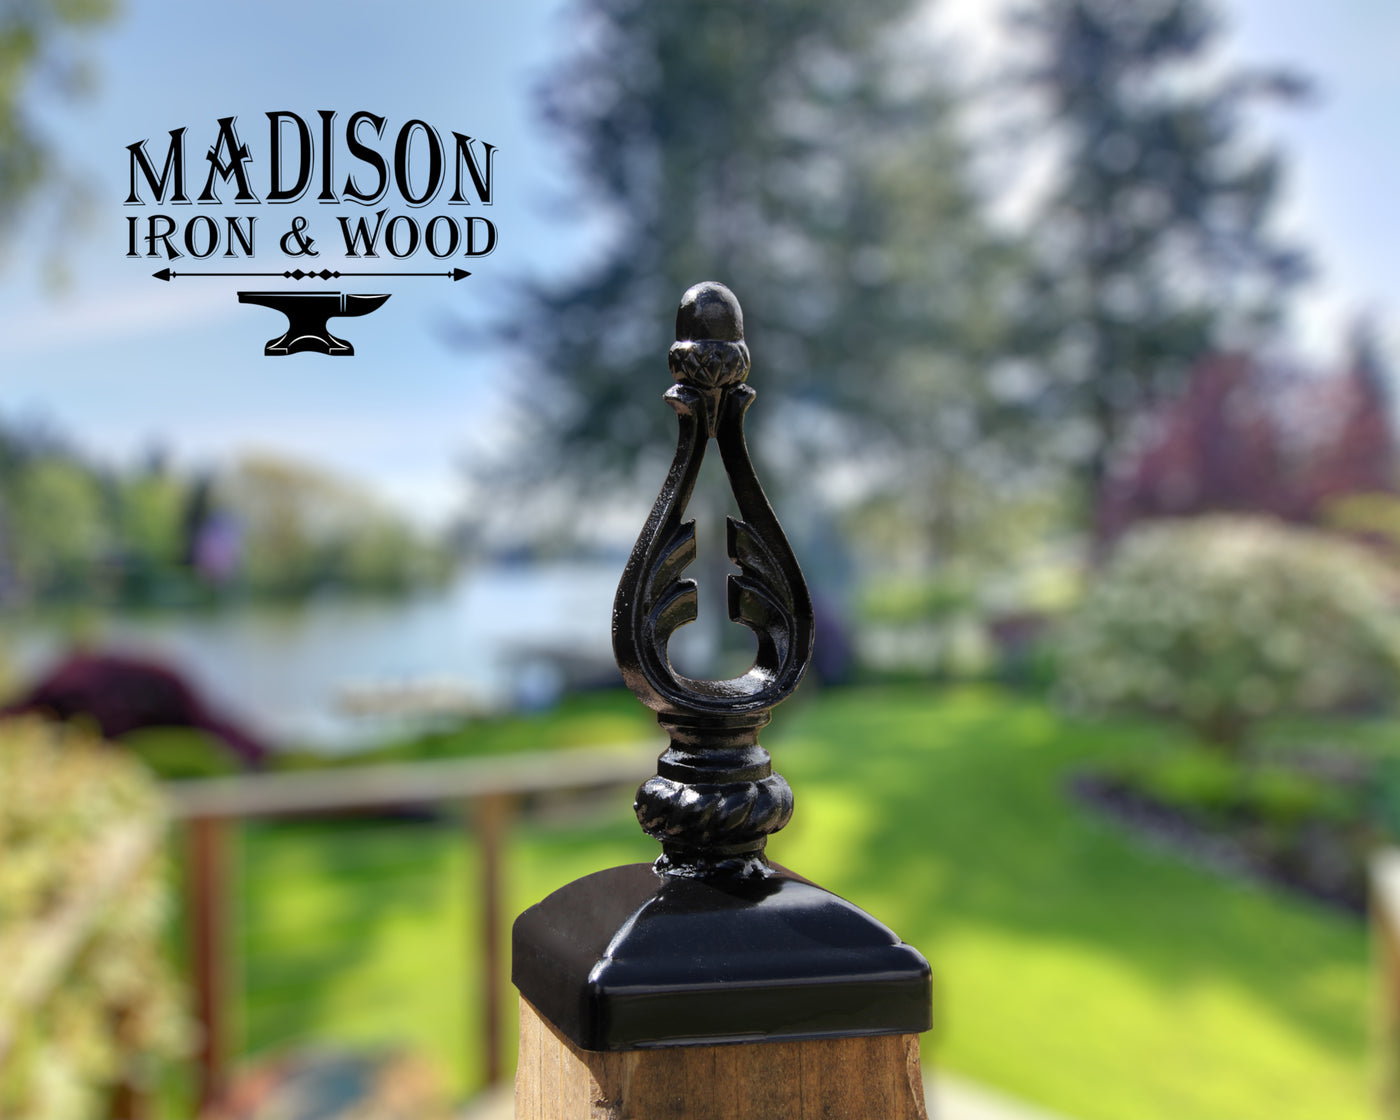 4X4 Acorn Top Post Cap - Madison Iron and Wood - Post Cap - metal outdoor decor - Steel deocrations - american made products - veteran owned business products - fencing decorations - fencing supplies - custom wall decorations - personalized wall signs - steel - decorative post caps - steel post caps - metal post caps - brackets - structural brackets - home improvement - easter - easter decorations - easter gift - easter yard decor